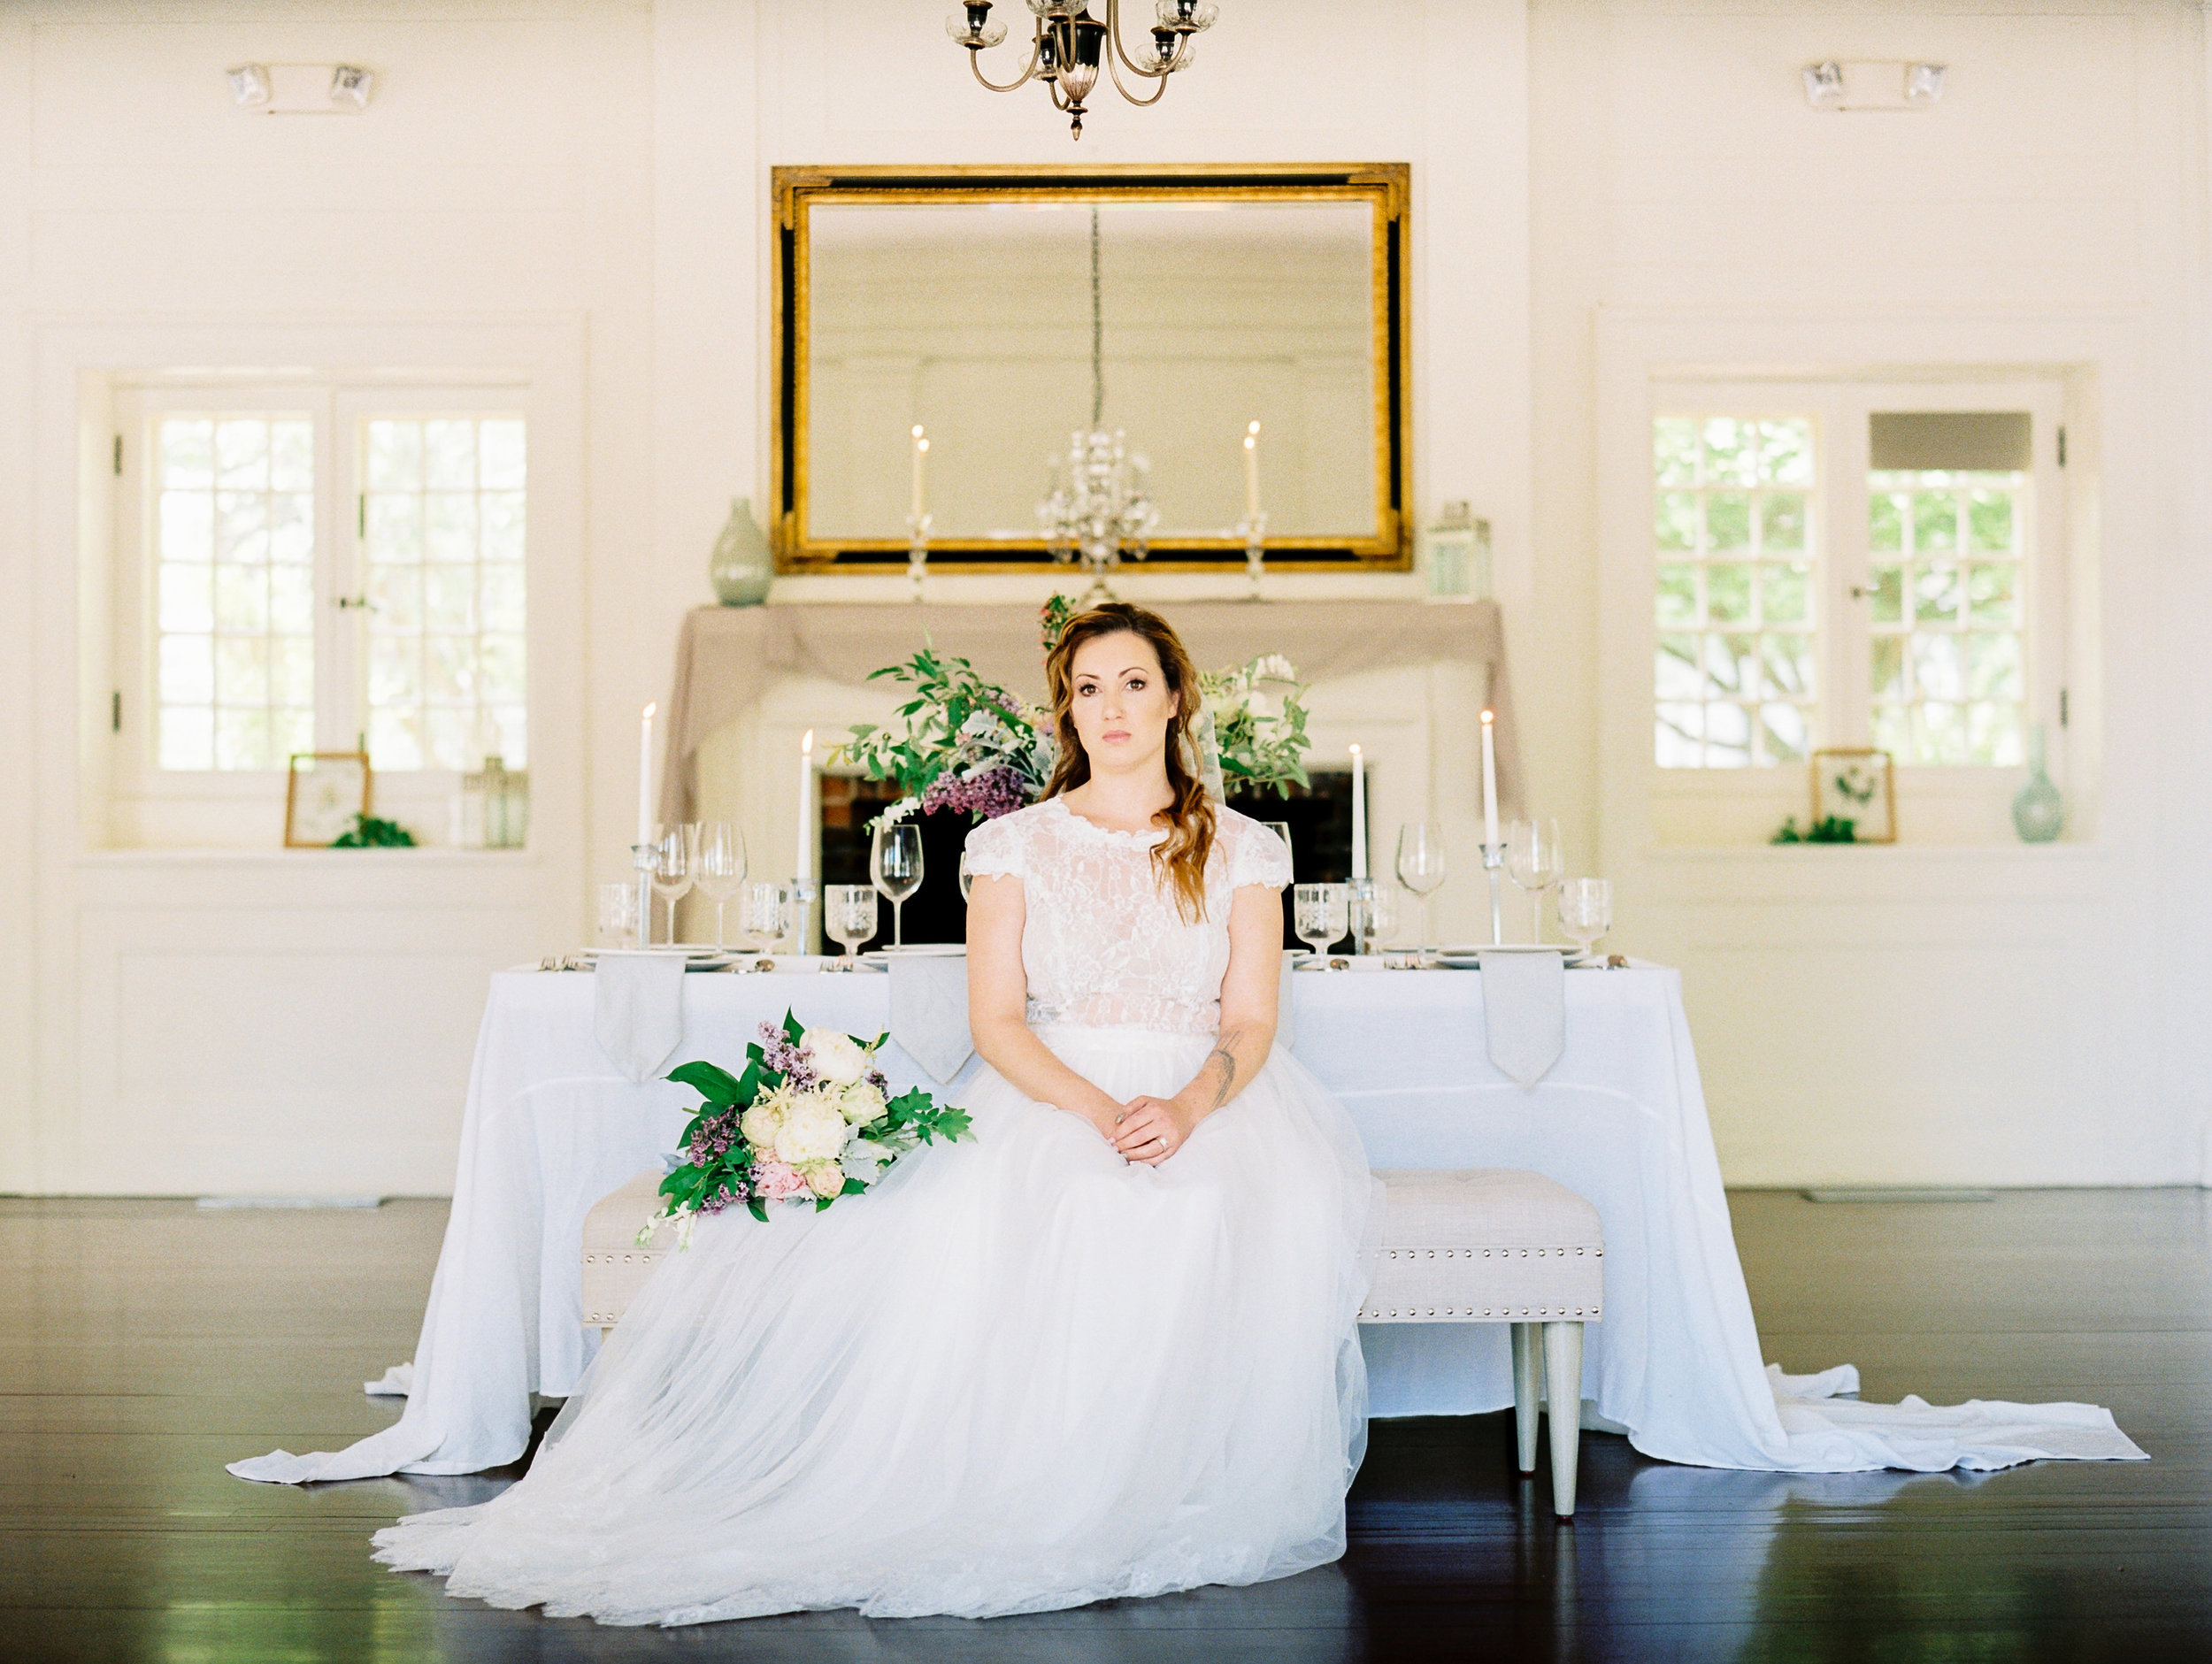 Bride with Bouquet Lavender, Greenery, White